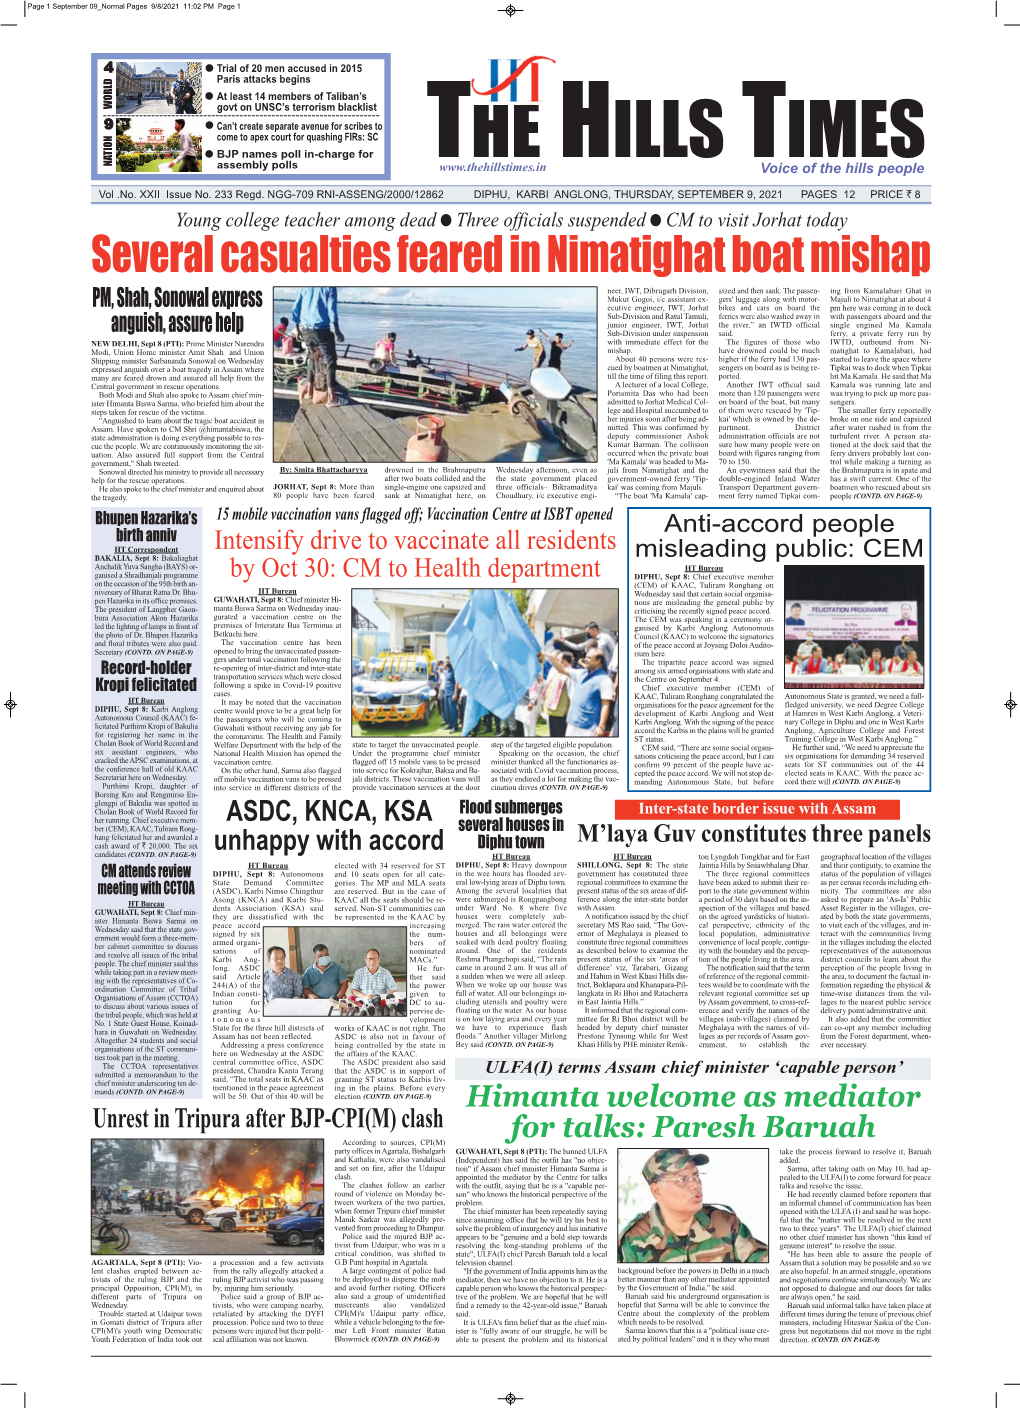 Several Casualties Feared in Nimatighat Boat Mishap